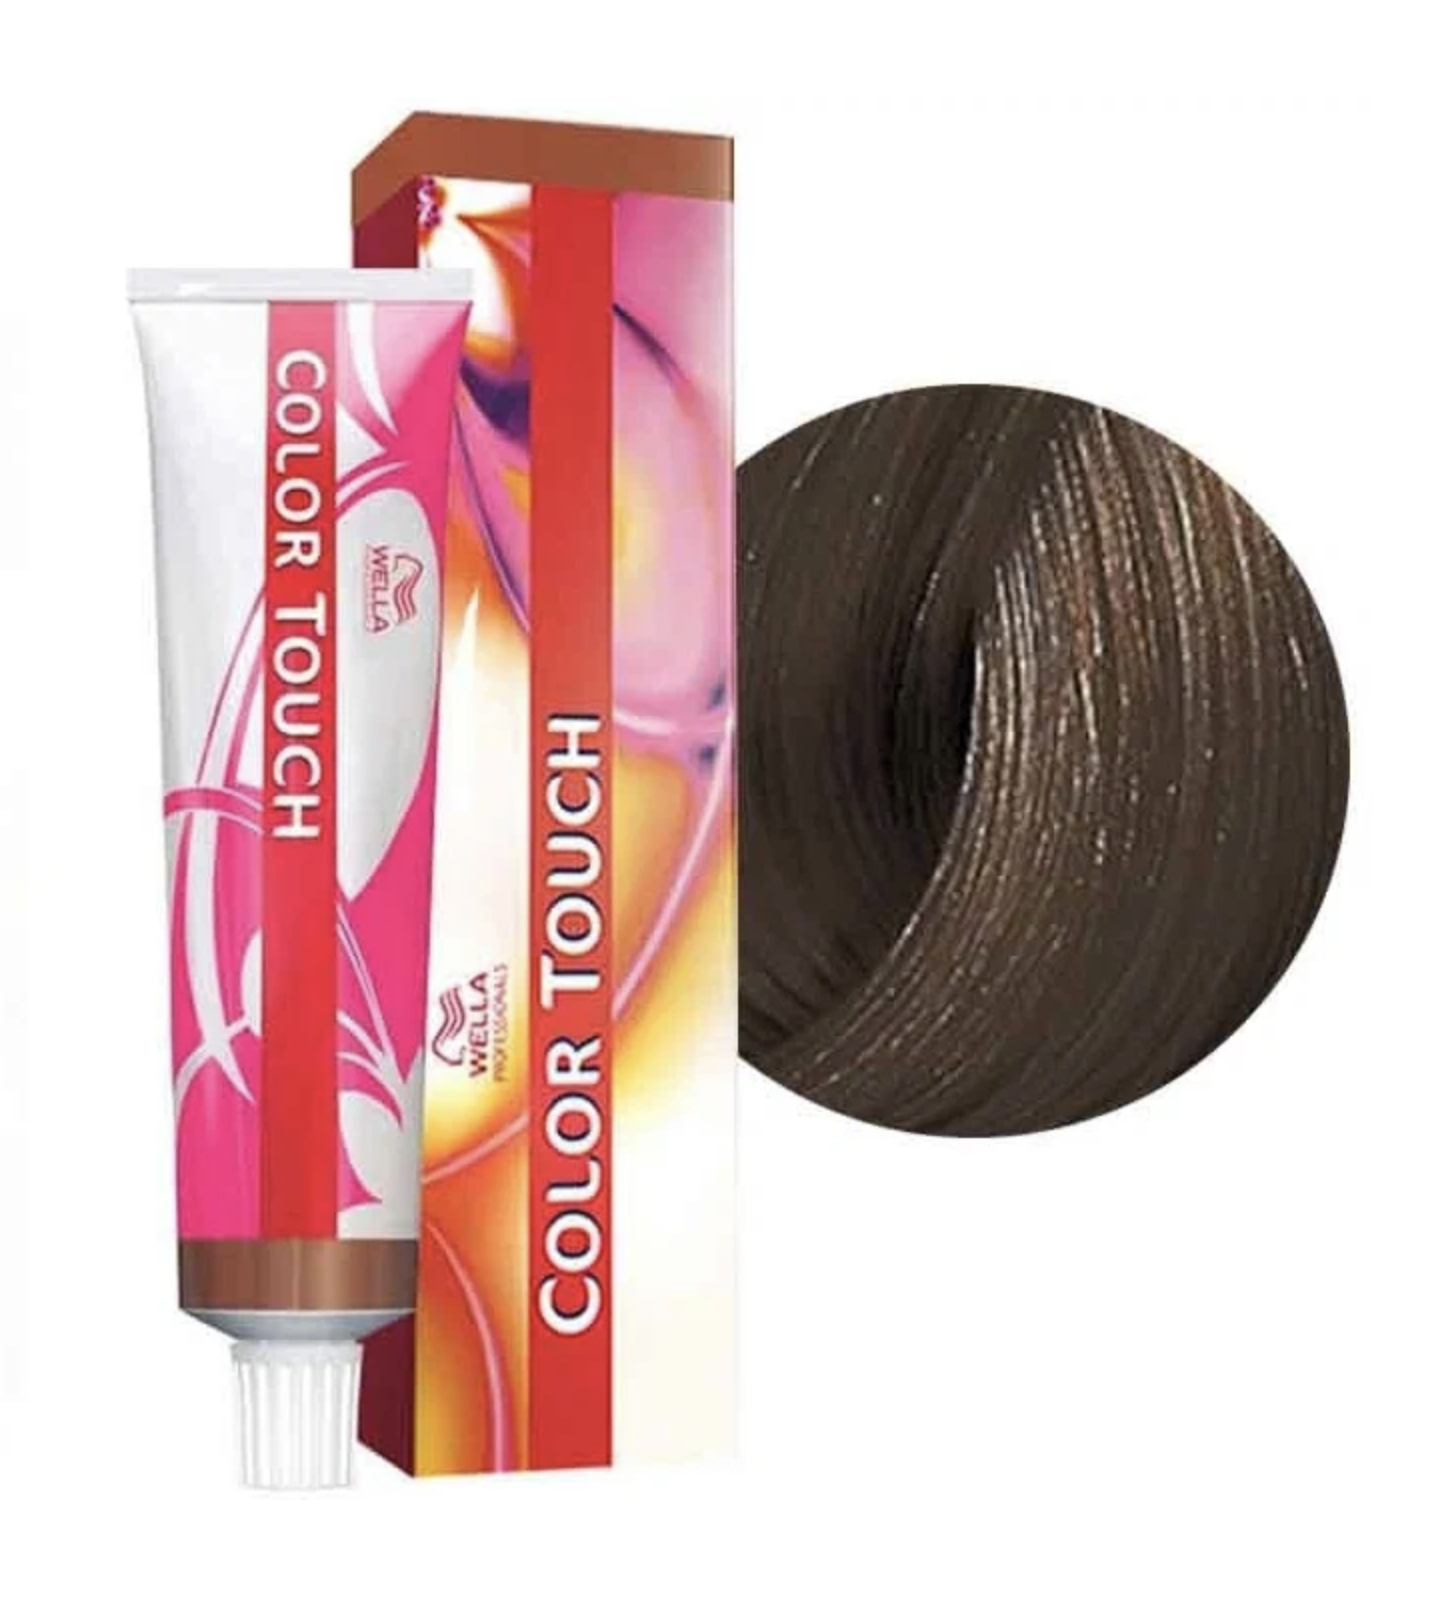   / Wella Color Touch - -    5/97 -  60 